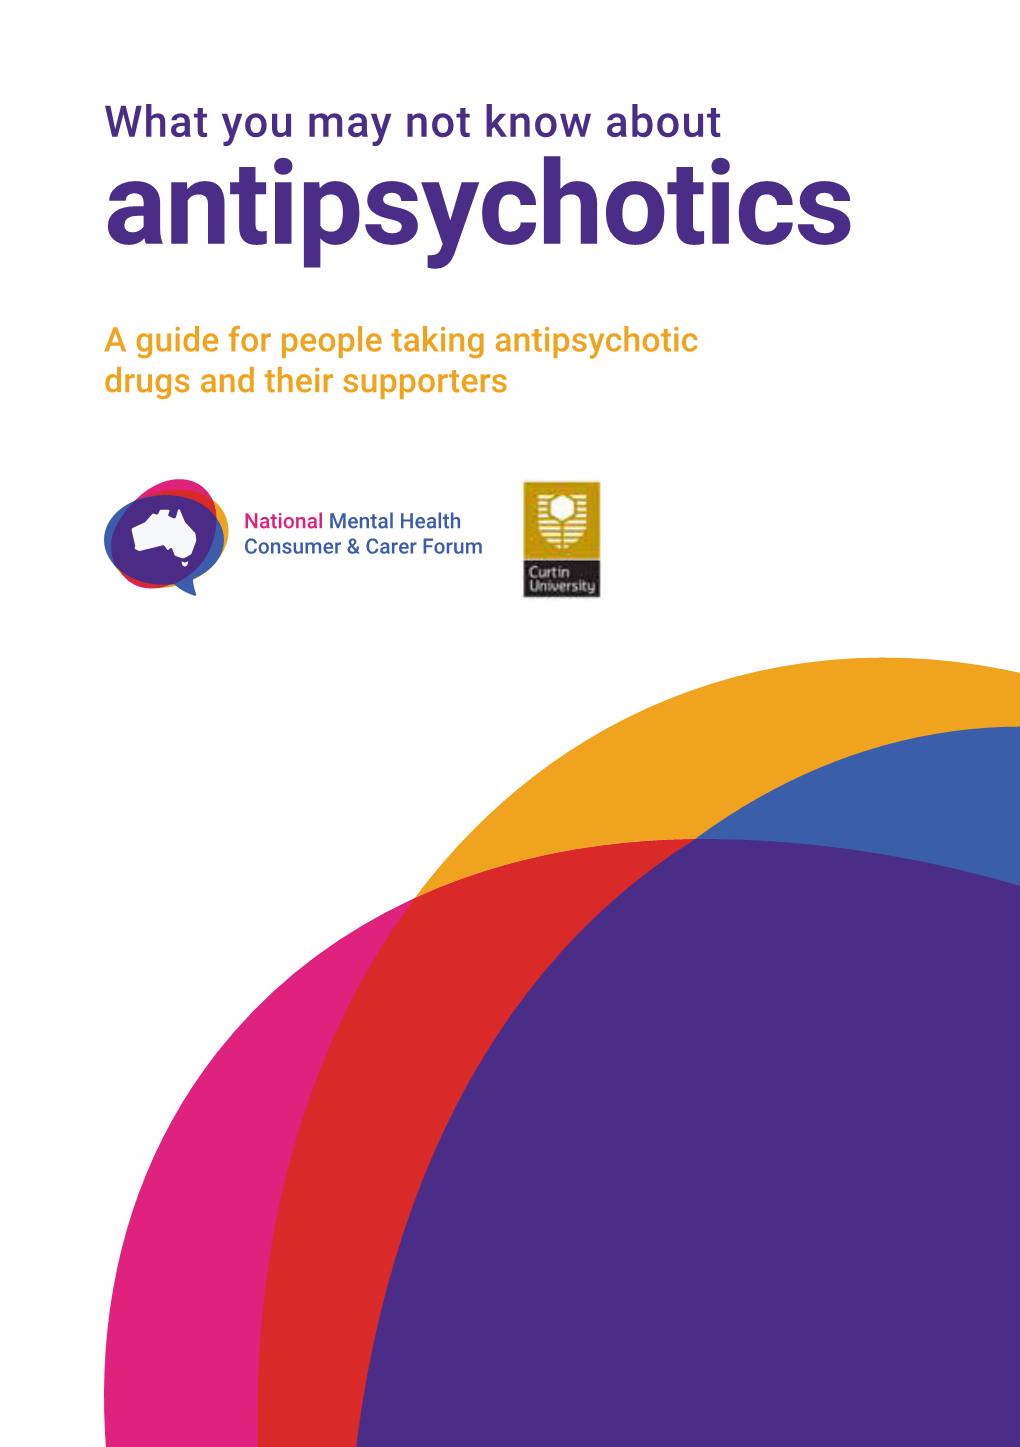 What You May Not Know About Antipsychotics